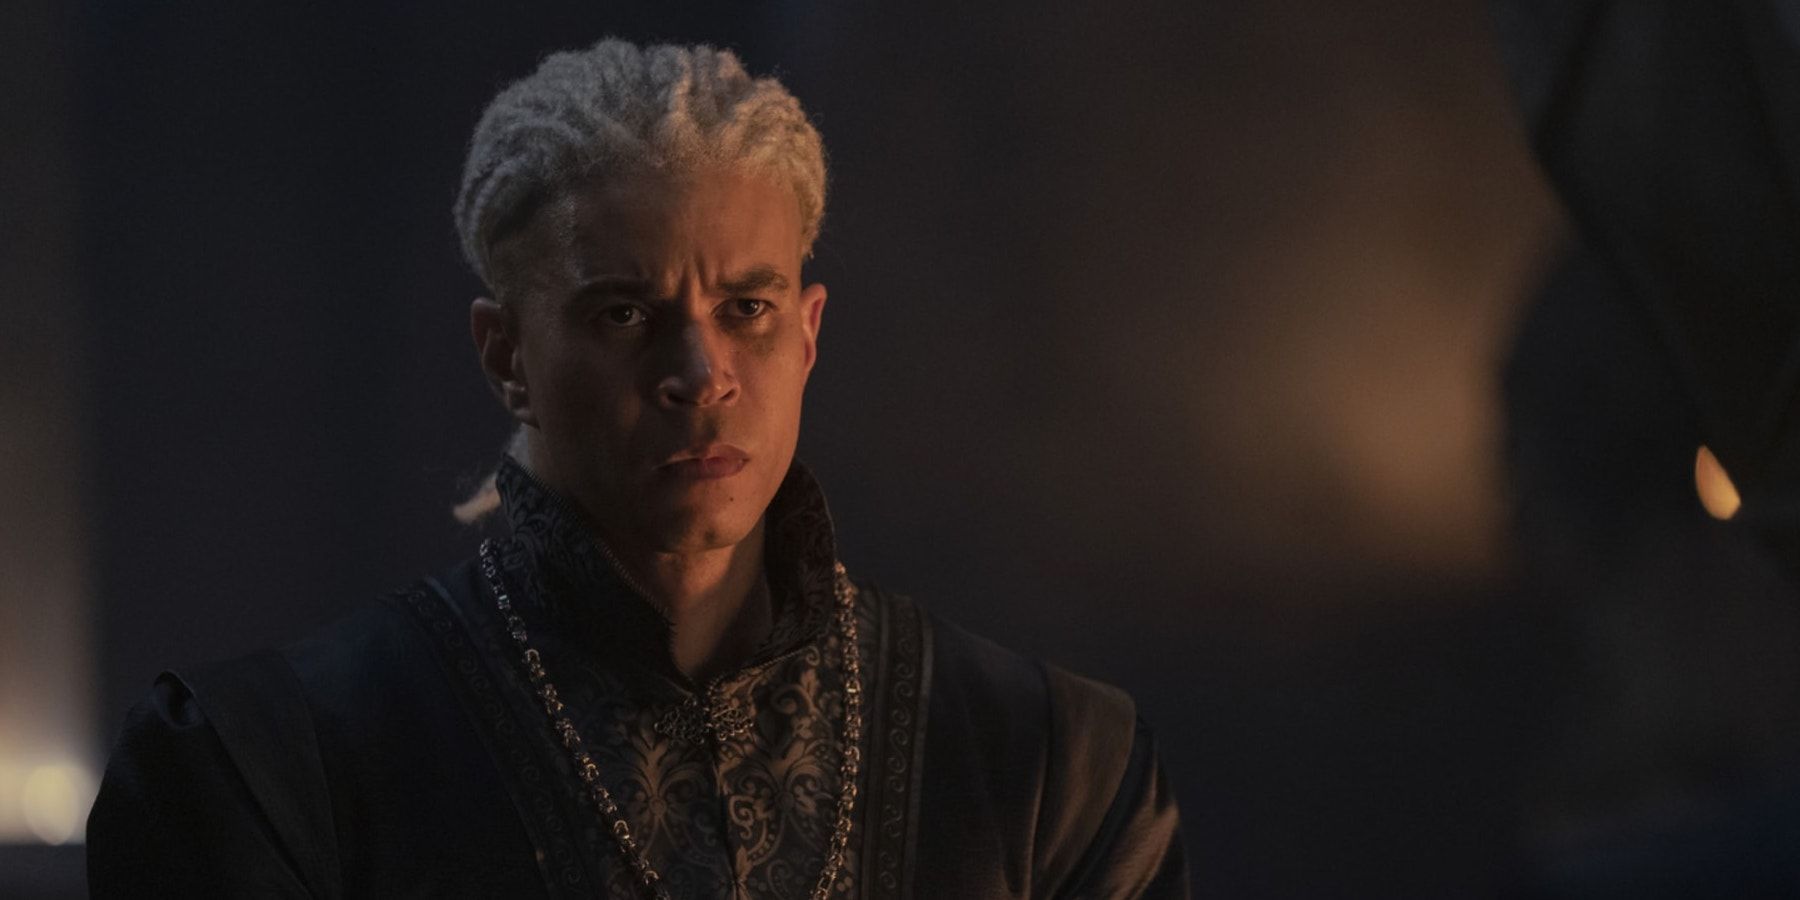 Laenor prior to his "Death" in Episode 7 in House of the Dragon